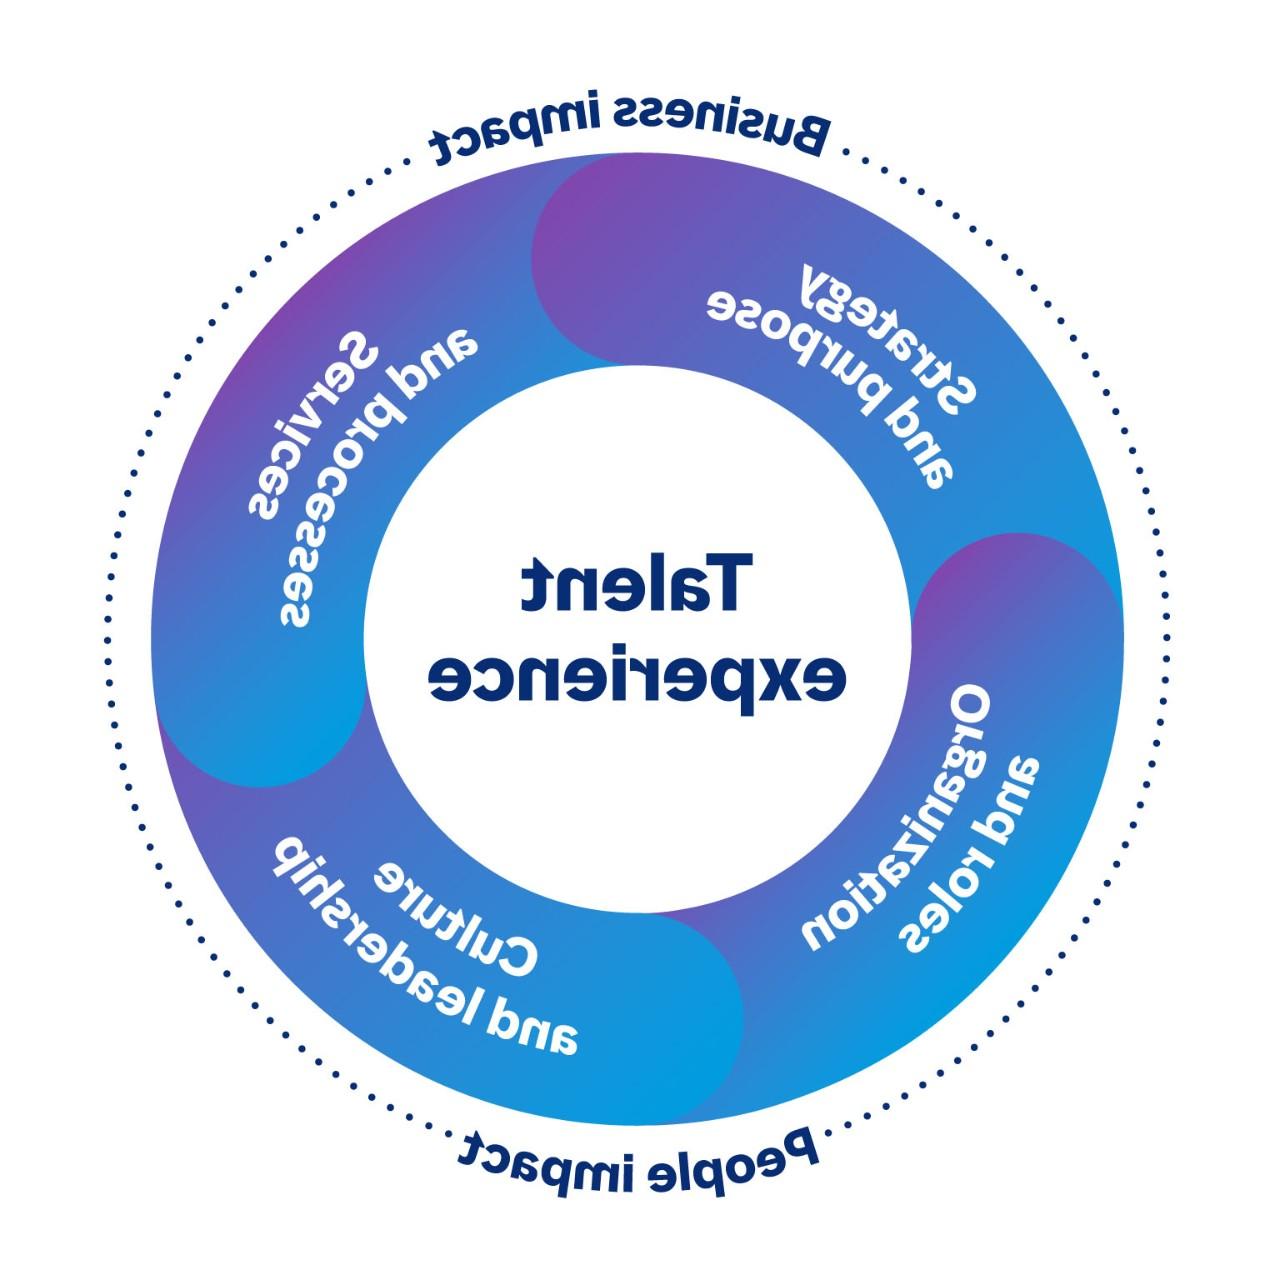 Circular image showing the connected areas of the talent experience that have both a business and people impact. The four areas are Strategy and purpose, Services and processes, Culture and leadership, and organisation and roles.